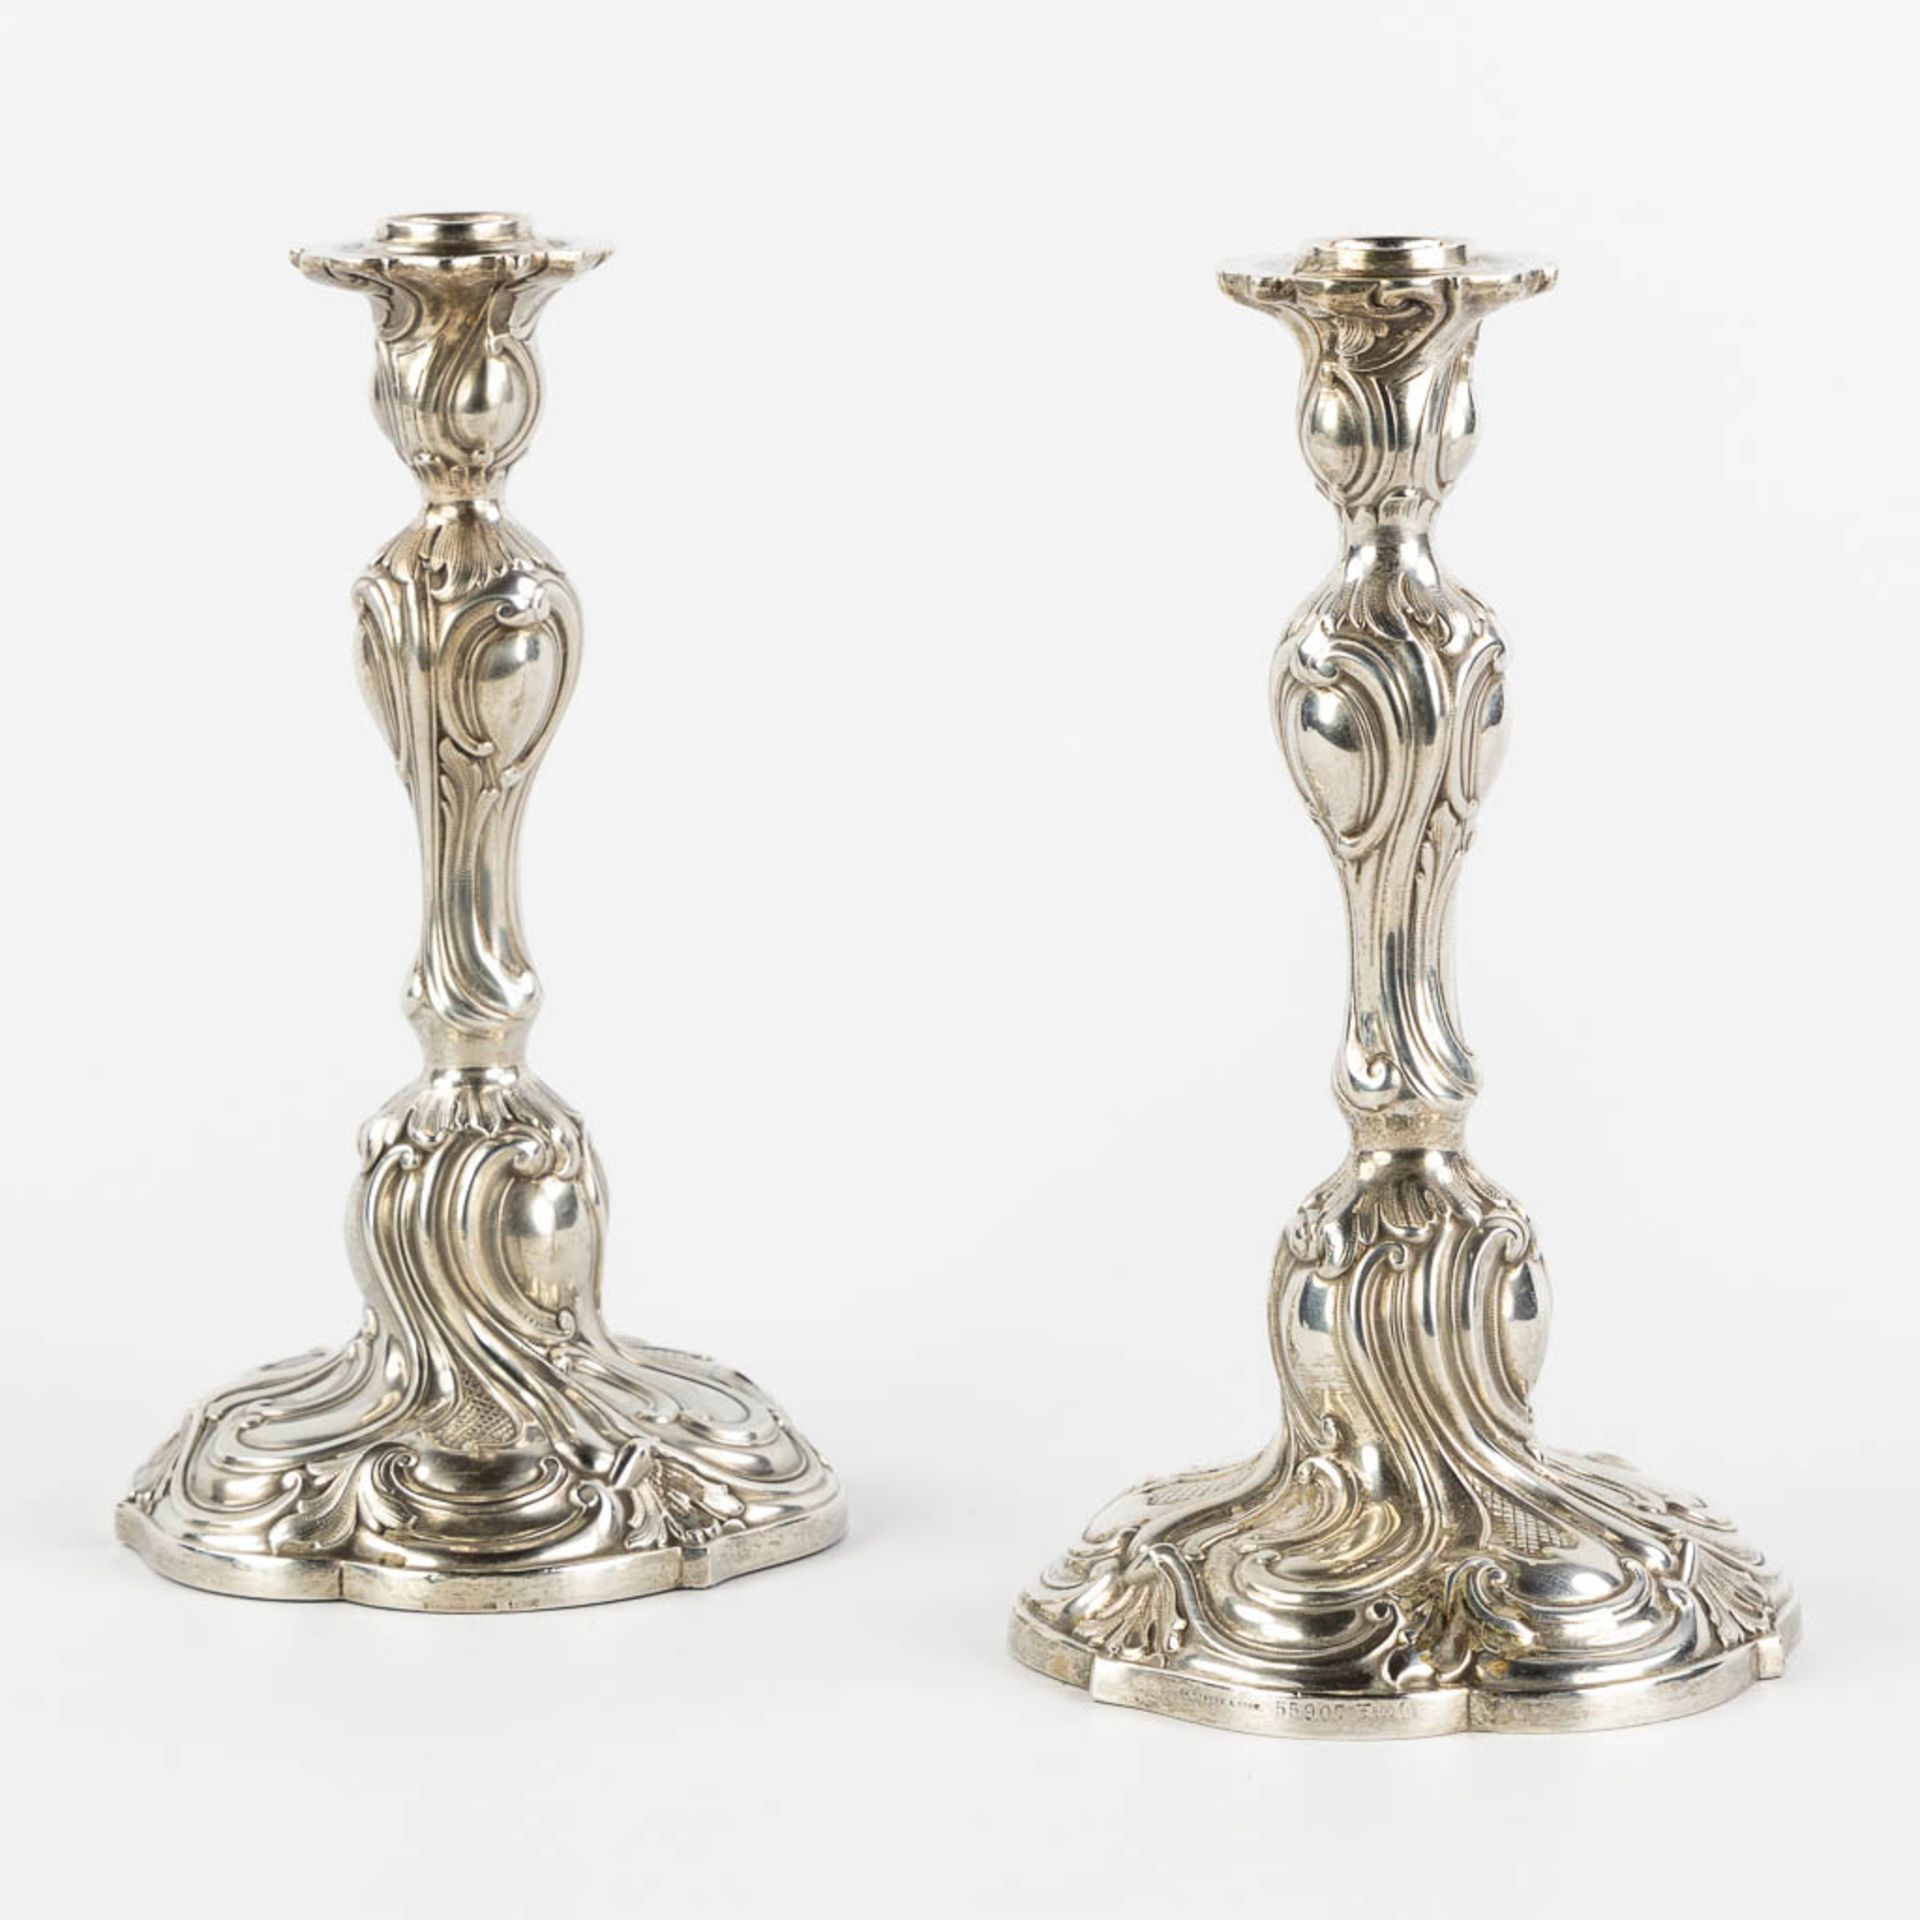 Th. Strube & Sohn, a pair of candlesticks, silver in Louis XV style. Germany. 800/1000. (H:22 x D:12